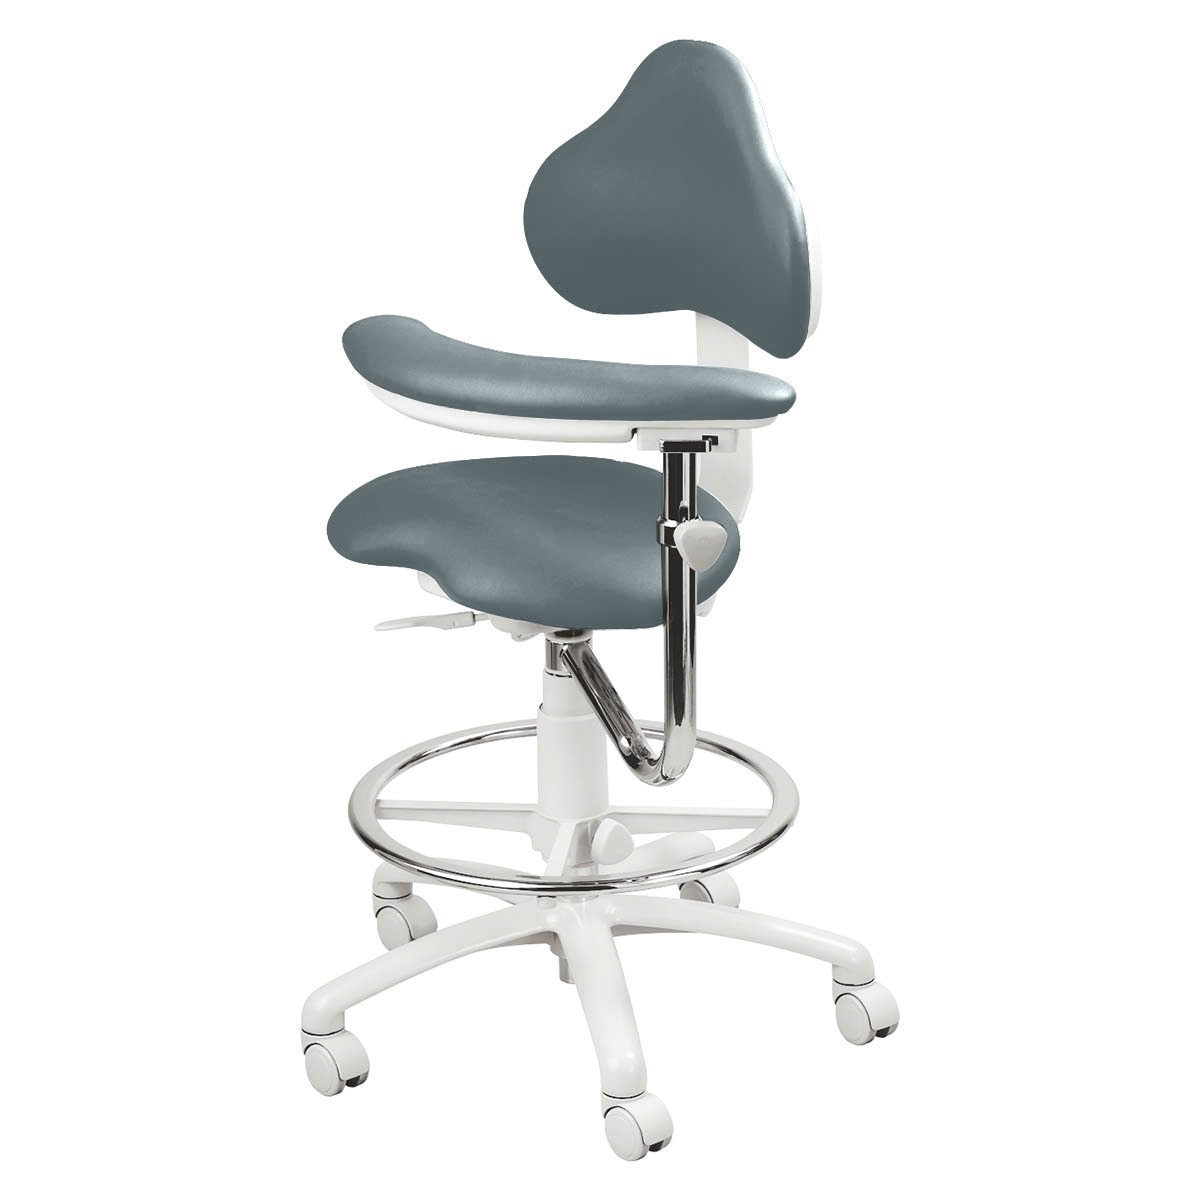 9120BL Dental Assistant Stool with Left Support in blue fog